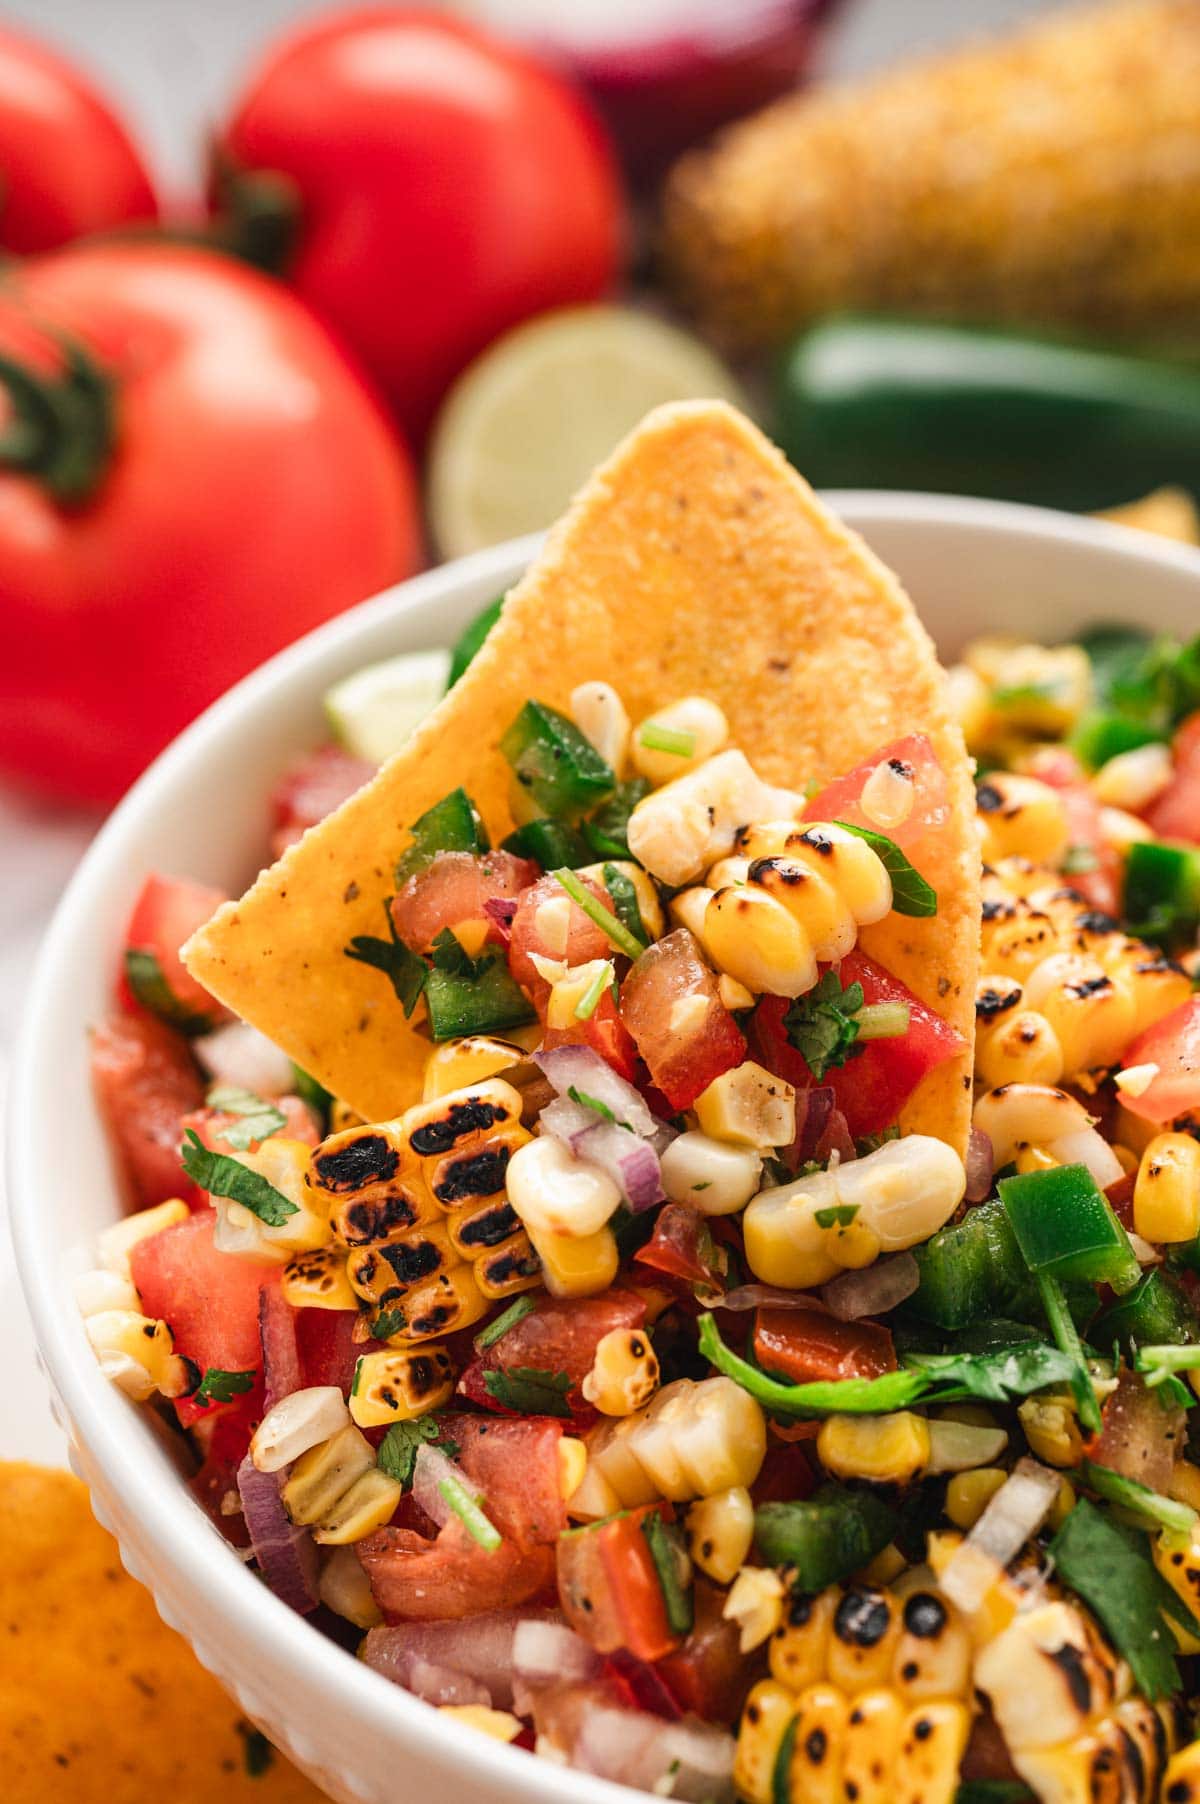 Corn salsa in a white bowl with a tortilla chip.